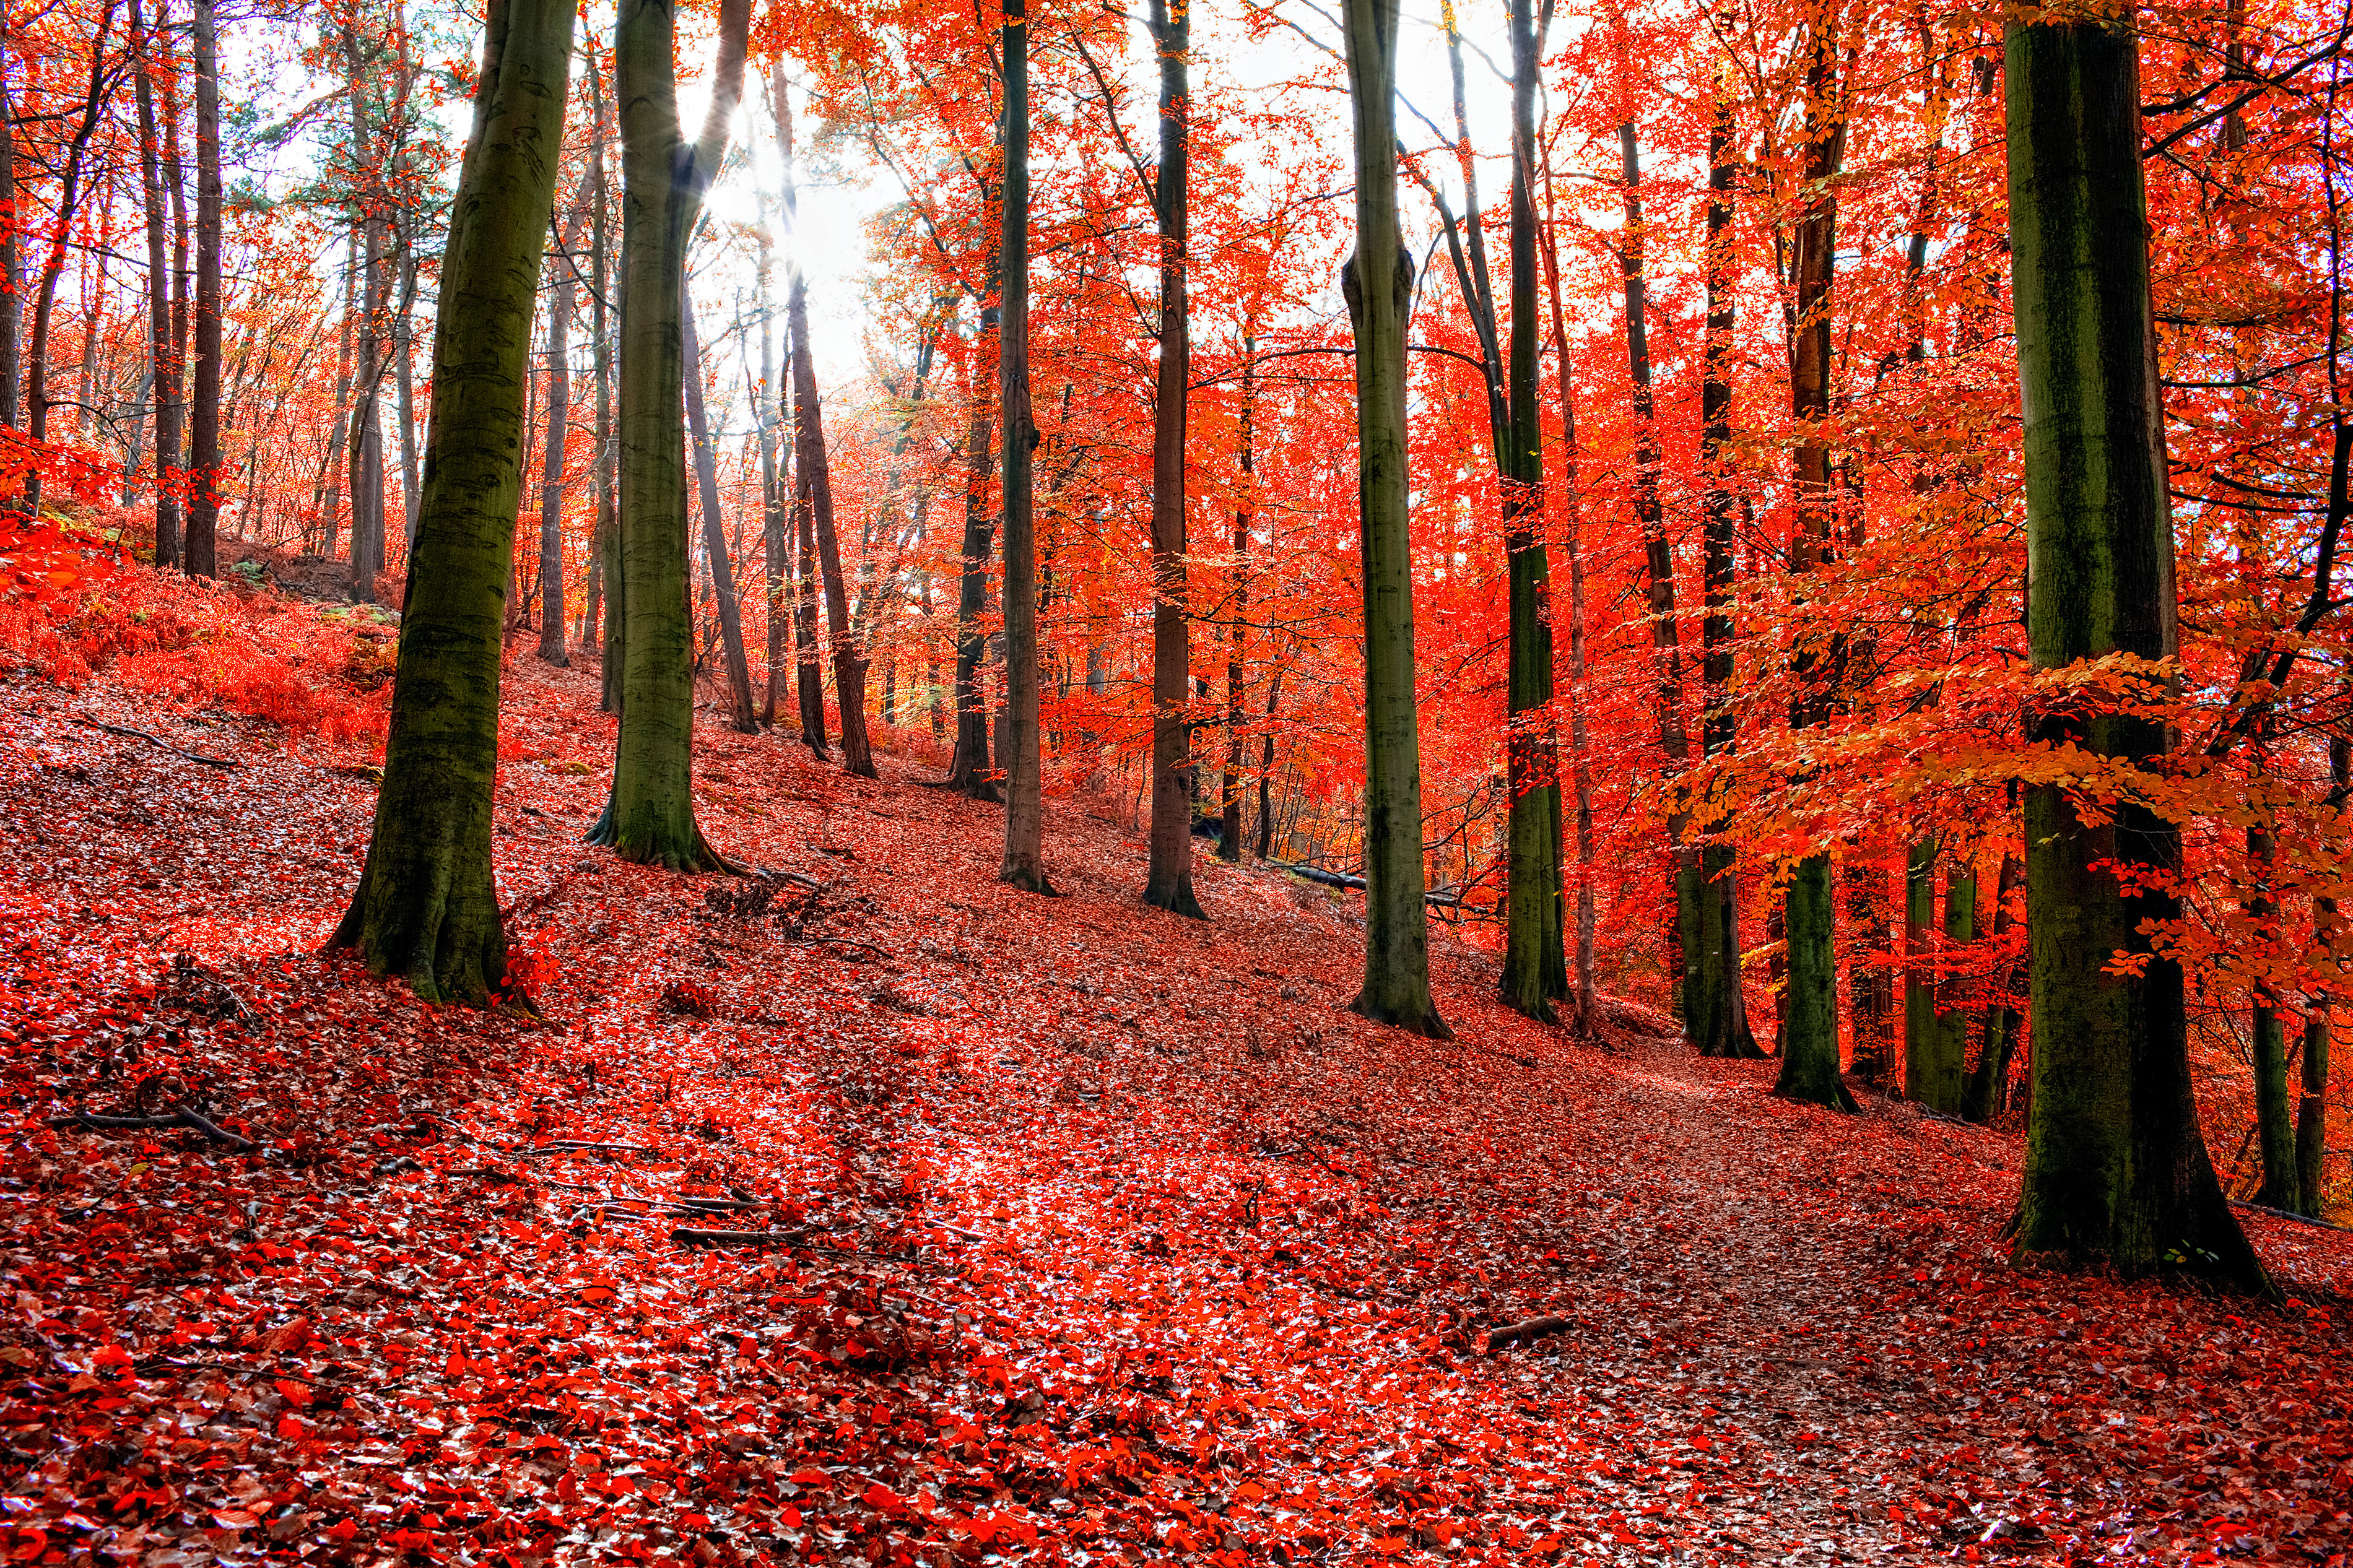 Trees with red autumn leafs in Sonian Forest